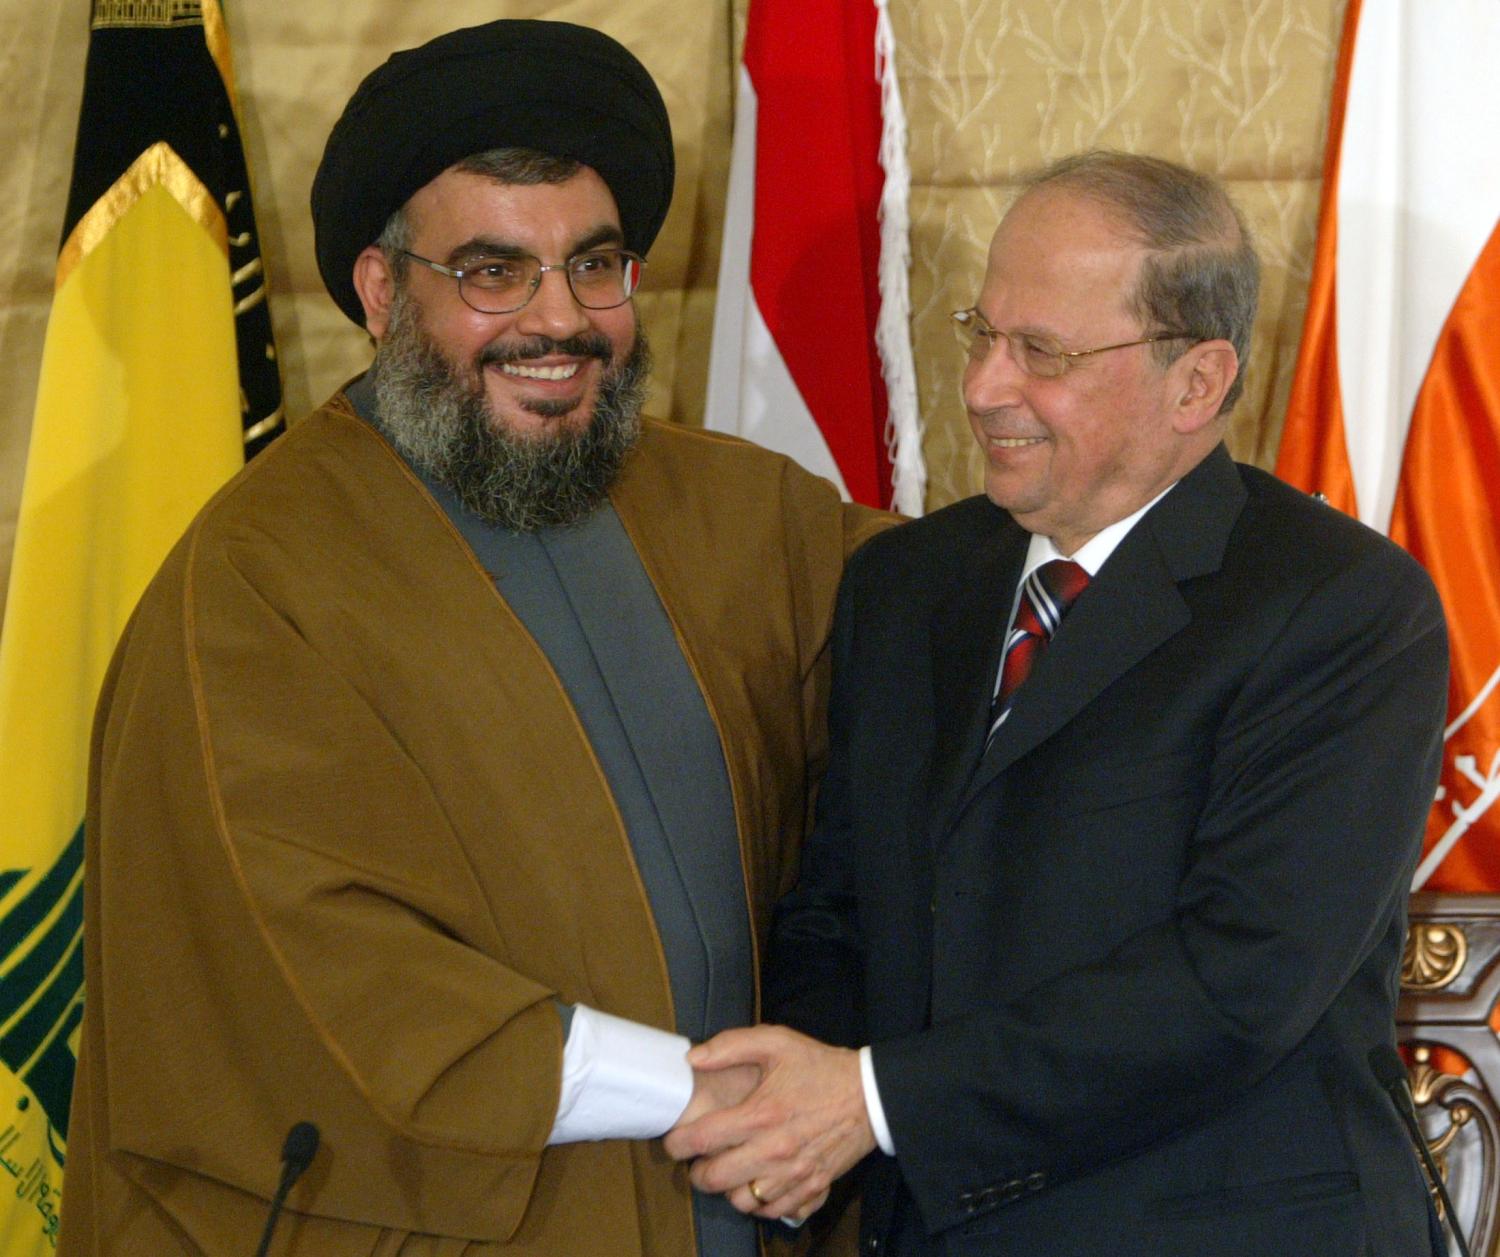 Lebanon's Hizbollah leader Sheikh Hassan Nasrallah (L) shakes hands with compatriot Christian leader Michel Aoun during a news conference in a church in Beirut, Lebanon February 6, 2006. The Chief of Lebanon's Hizbollah joined forces on Monday with Maronite Christian leader Michel Aoun to call for normal diplomatic ties with Syria. REUTERS/Mohamed Azakir - RP3DSFCZIEAB